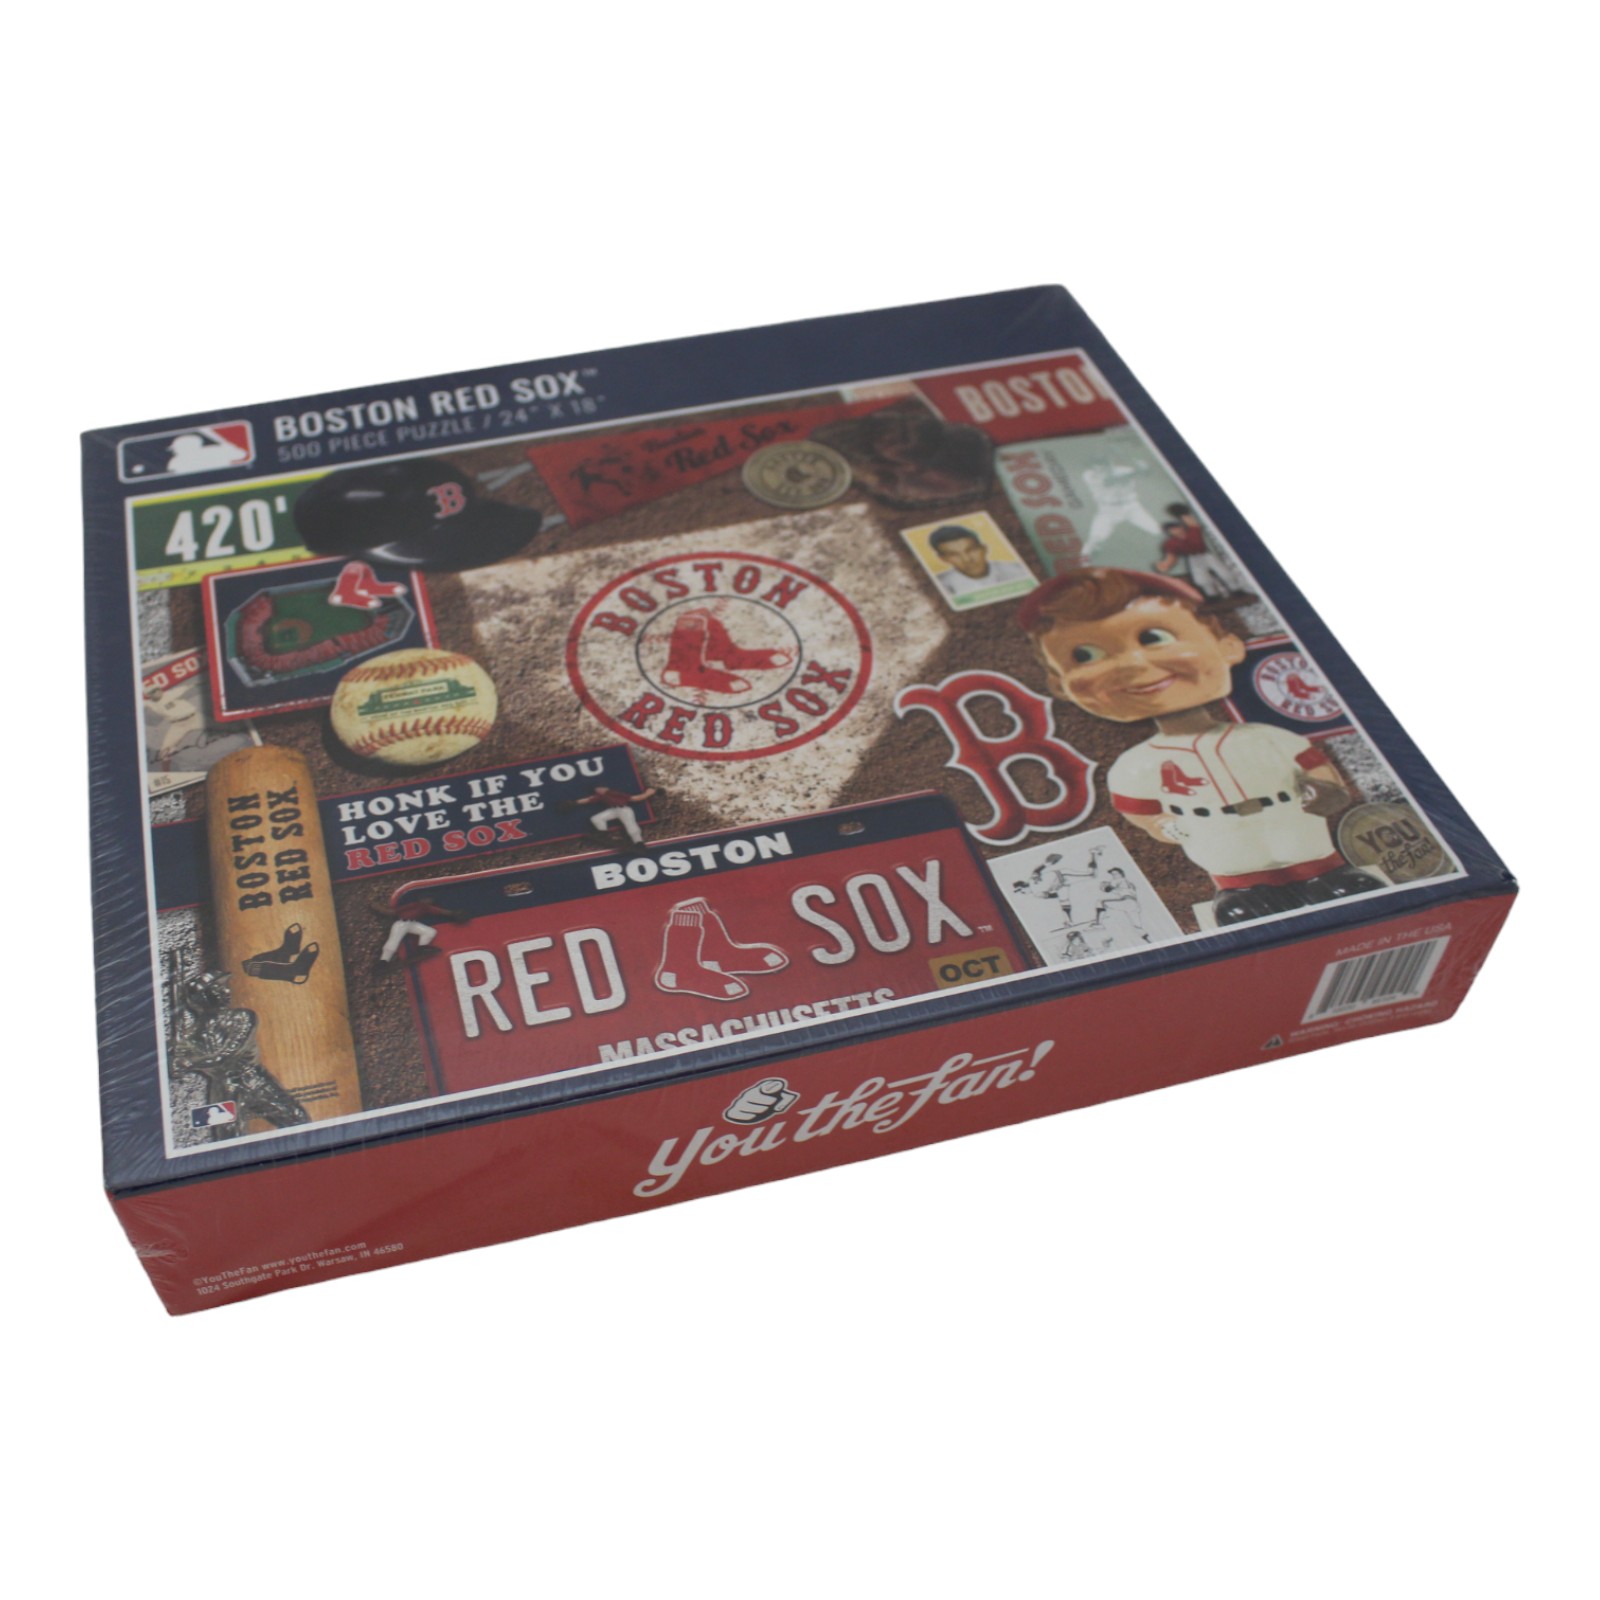 Boston Red Sox 18"x24" YouTheFan 500 Piece Retro Series Puzzle